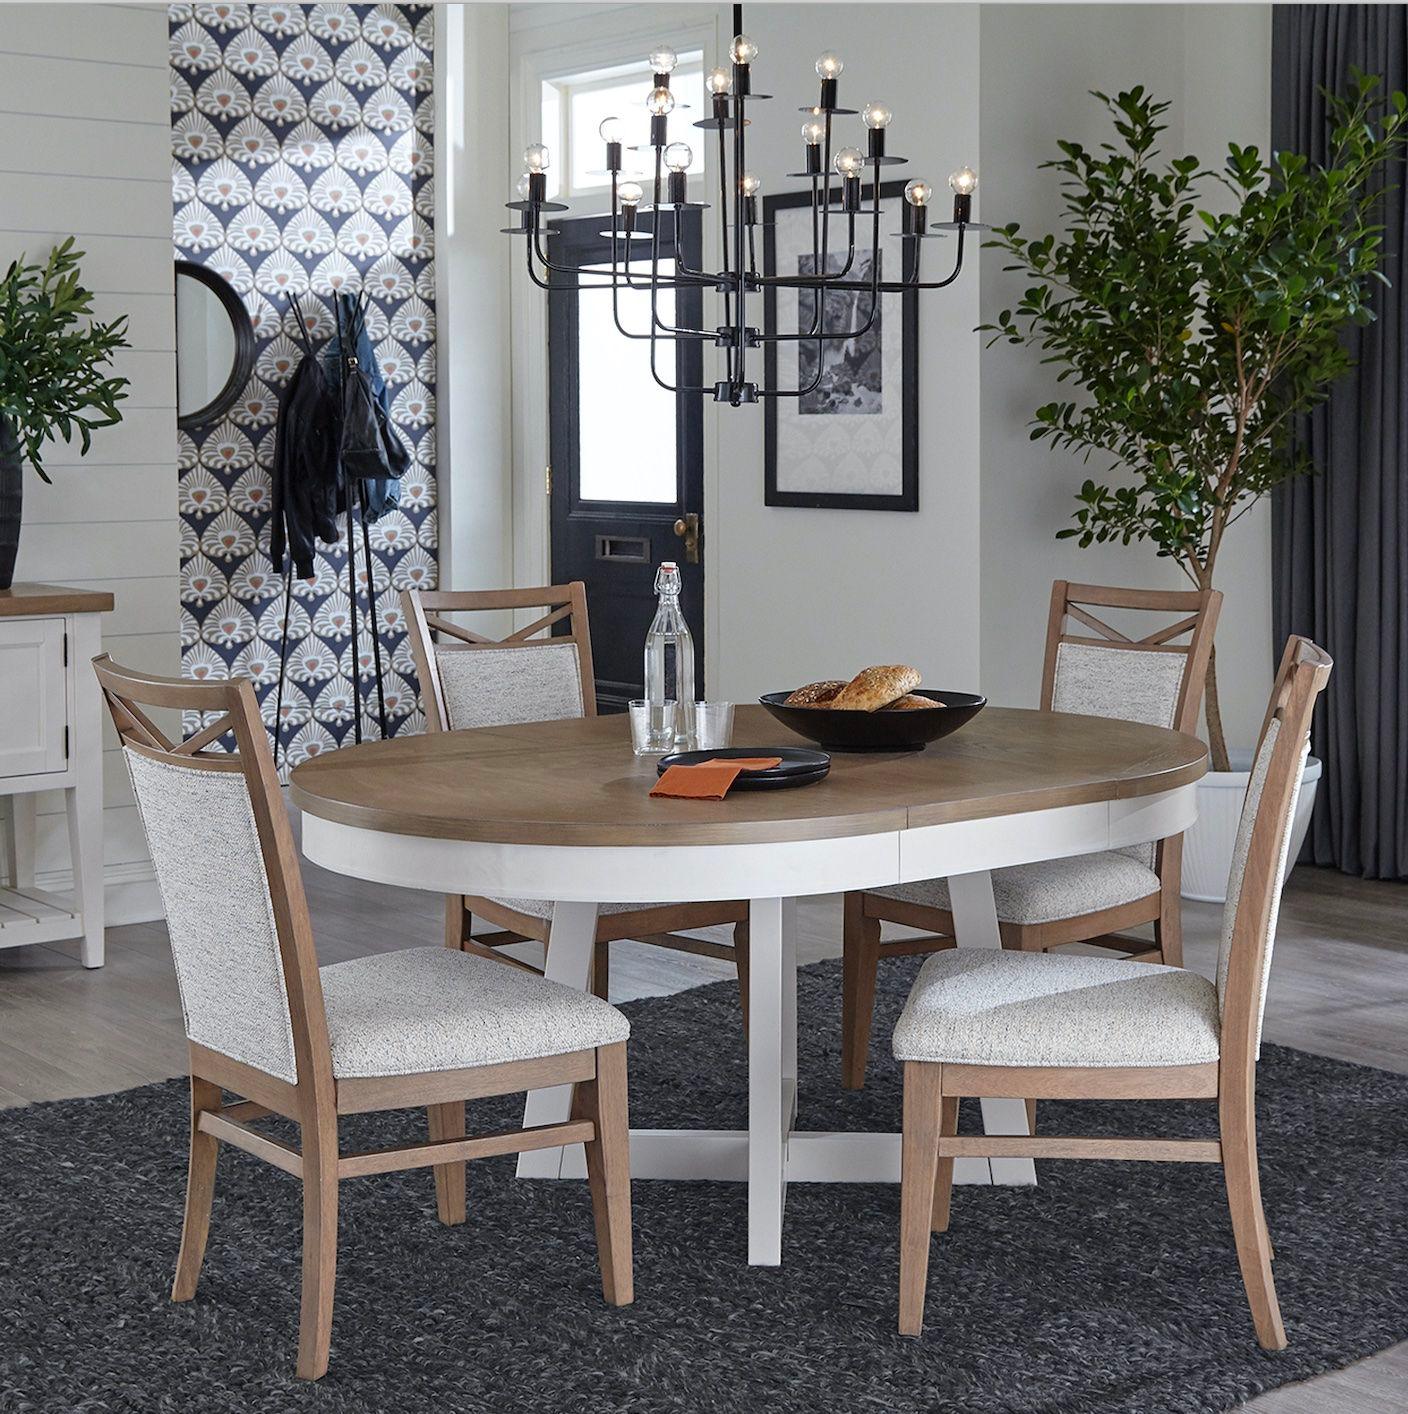 Parker House Furniture - Americana Modern Dining - 48 In. Round Extendable Dining Table And 4 Upholstered Chairs - Light Brown - 5th Avenue Furniture